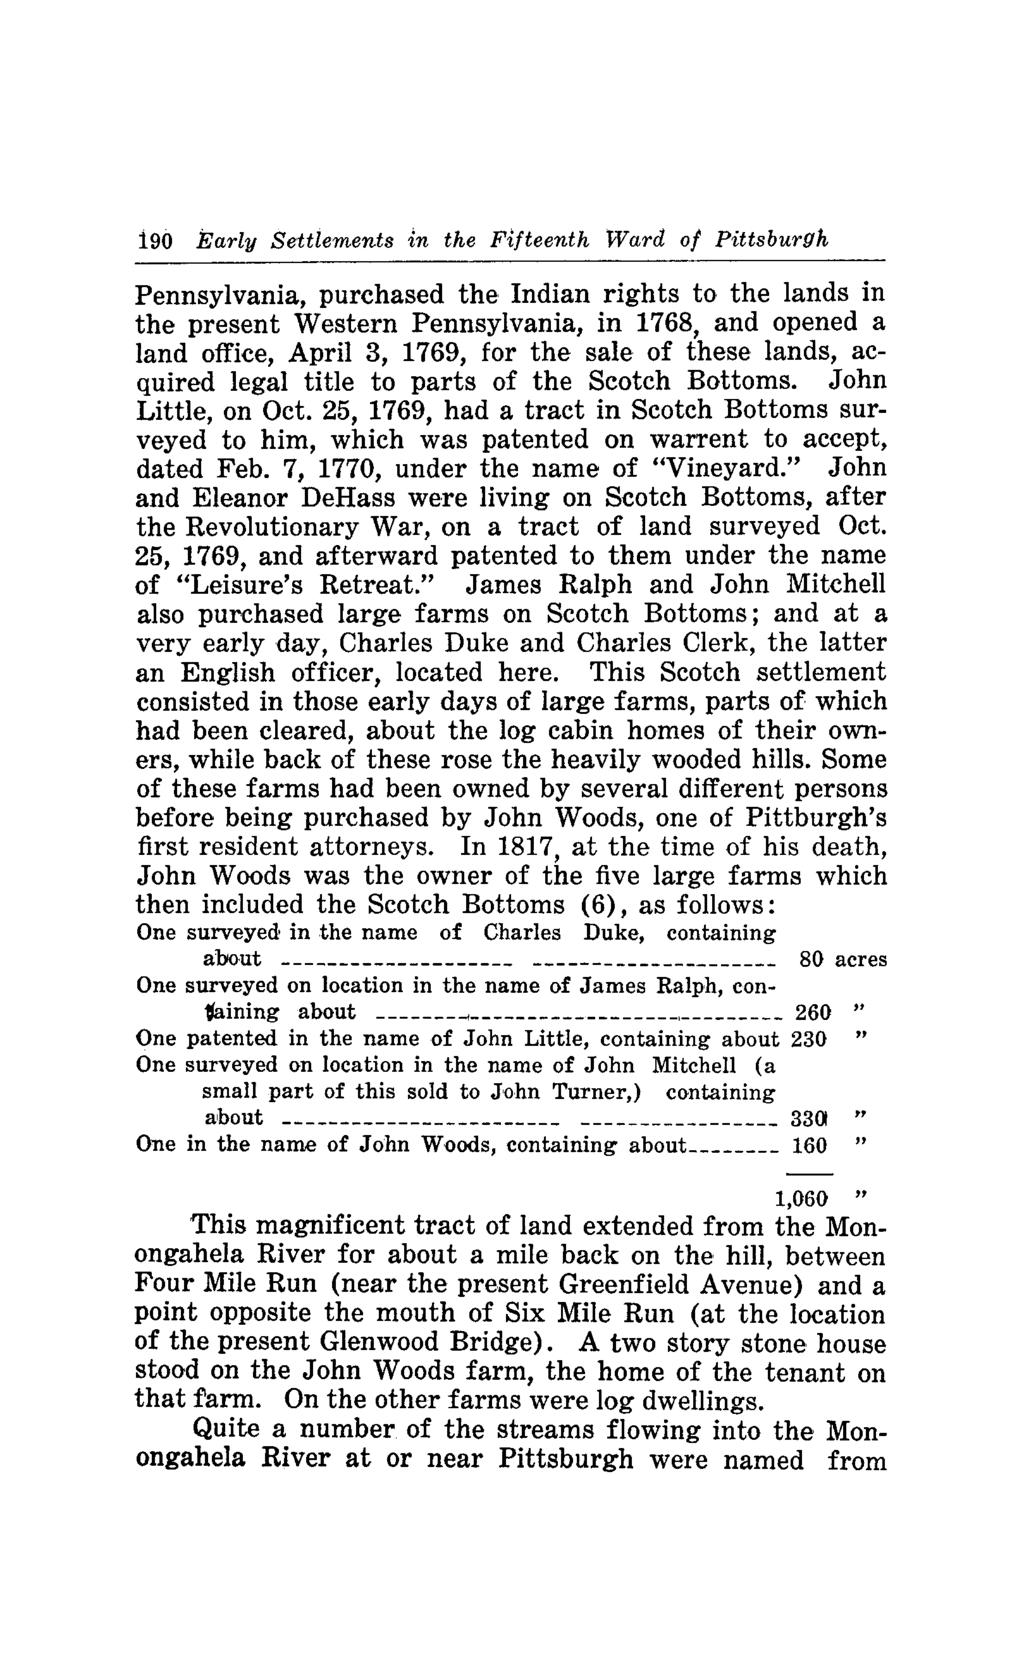 190 Early Settlements in the Fifteenth Ward of Pittsburgh Pennsylvania, purchased the Indian rights to the lands in the present Western Pennsylvania, in 1768, and opened a land office, April 3, 1769,